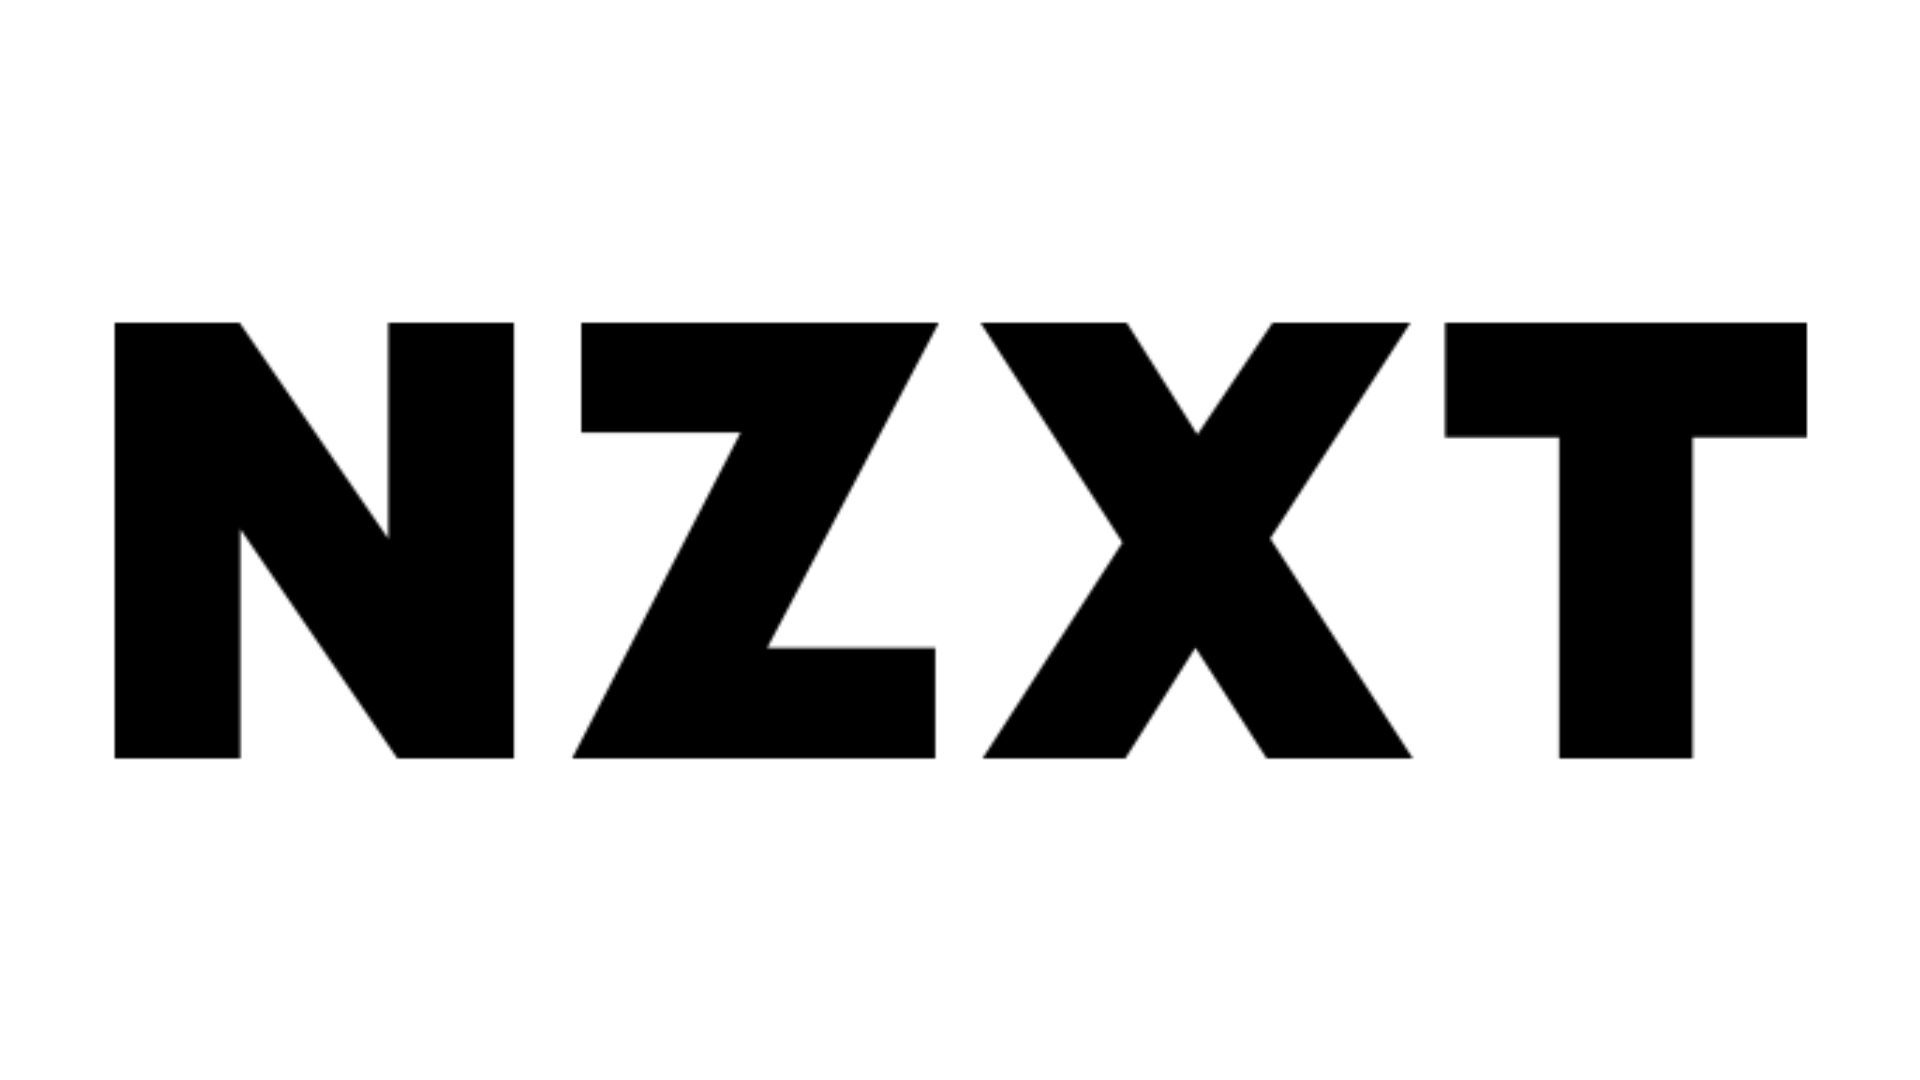 Best websites for custom PC builds, number 2: NZXT. It logo is on a black background.